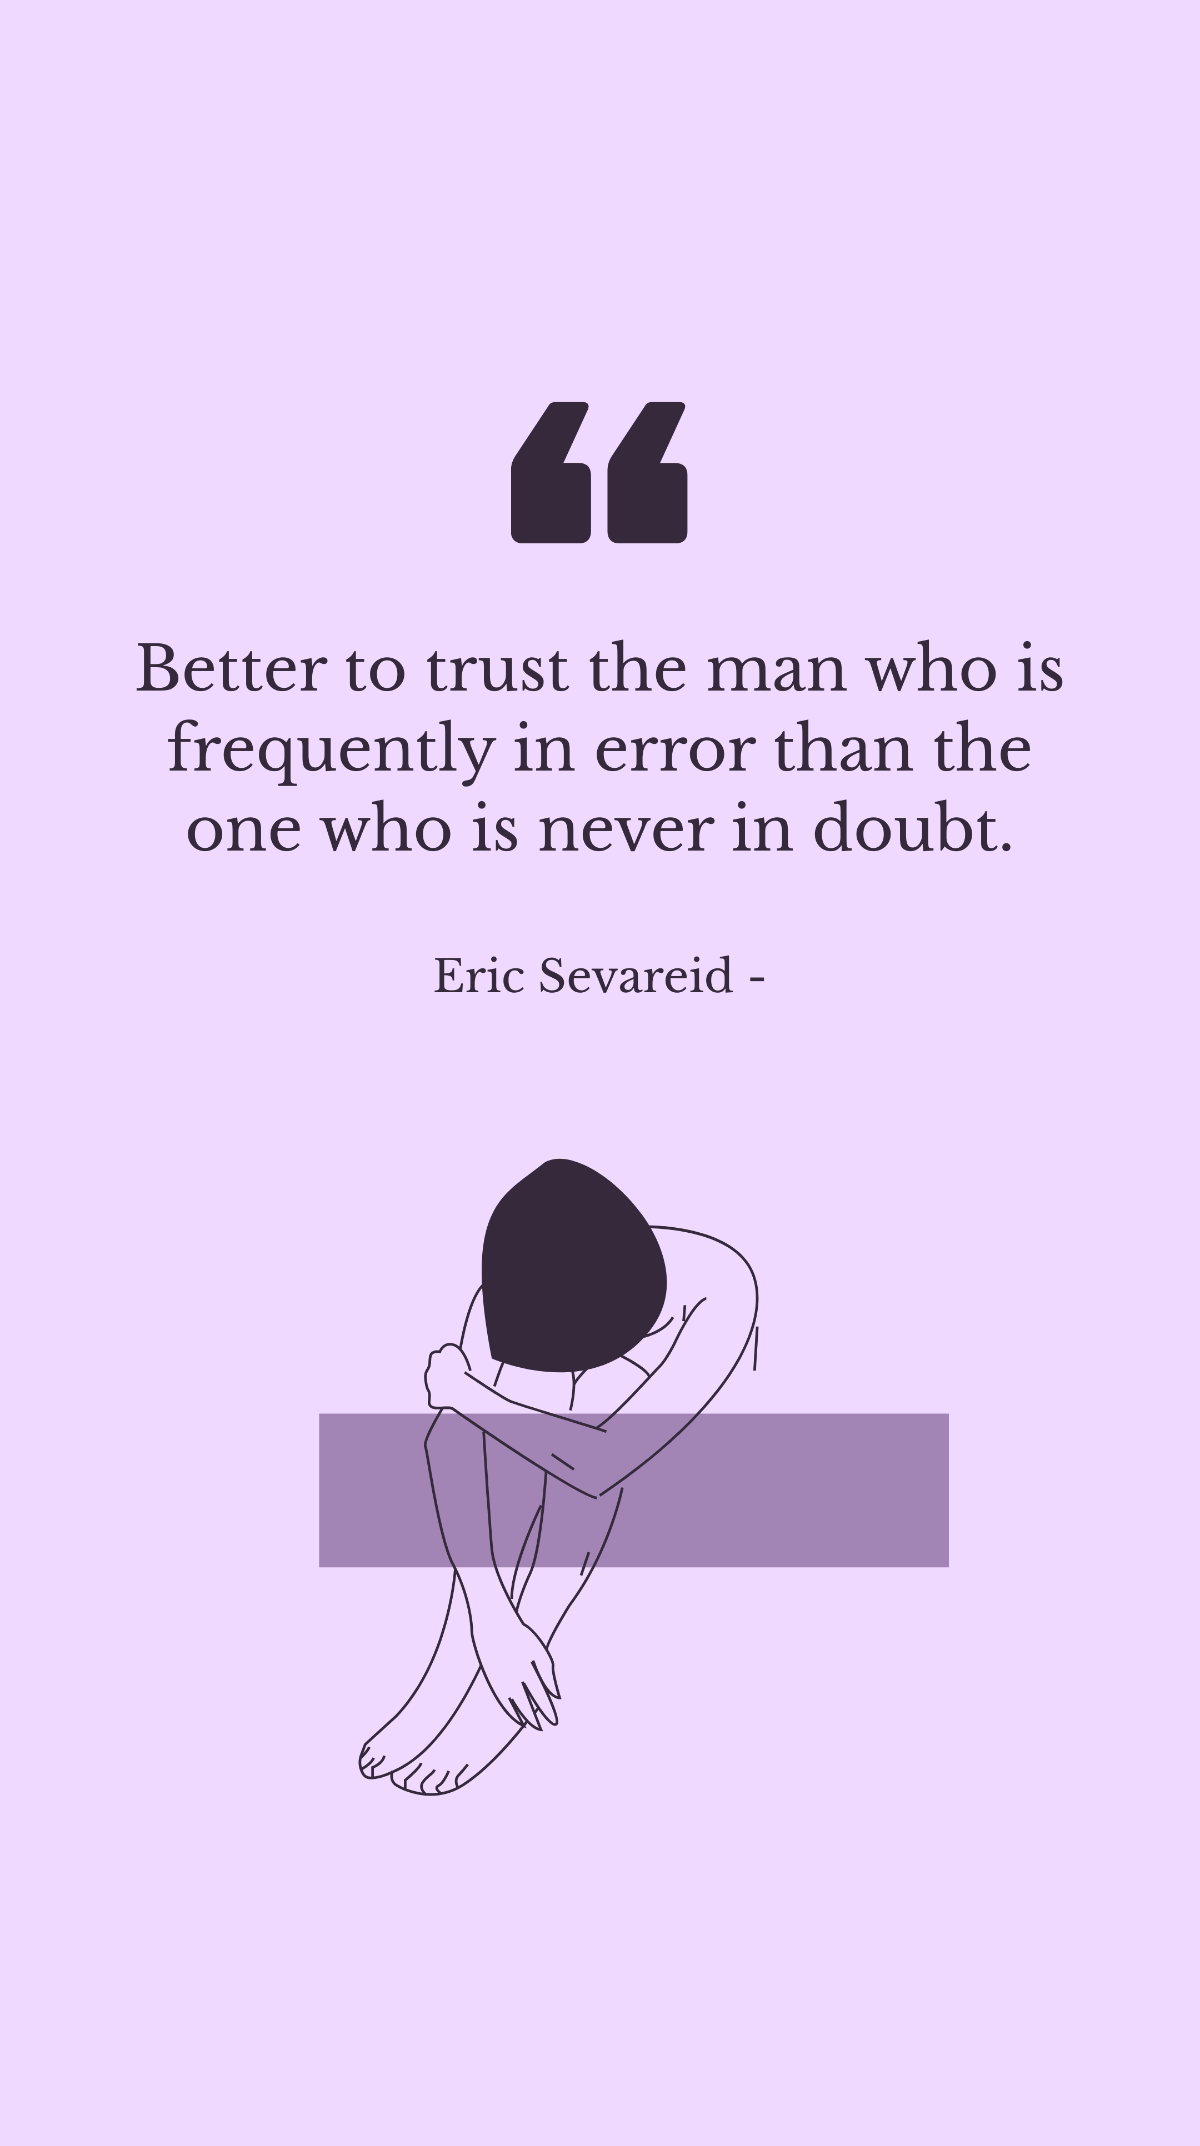 Eric Sevareid - Better to trust the man who is frequently in error than the one who is never in doubt. Template